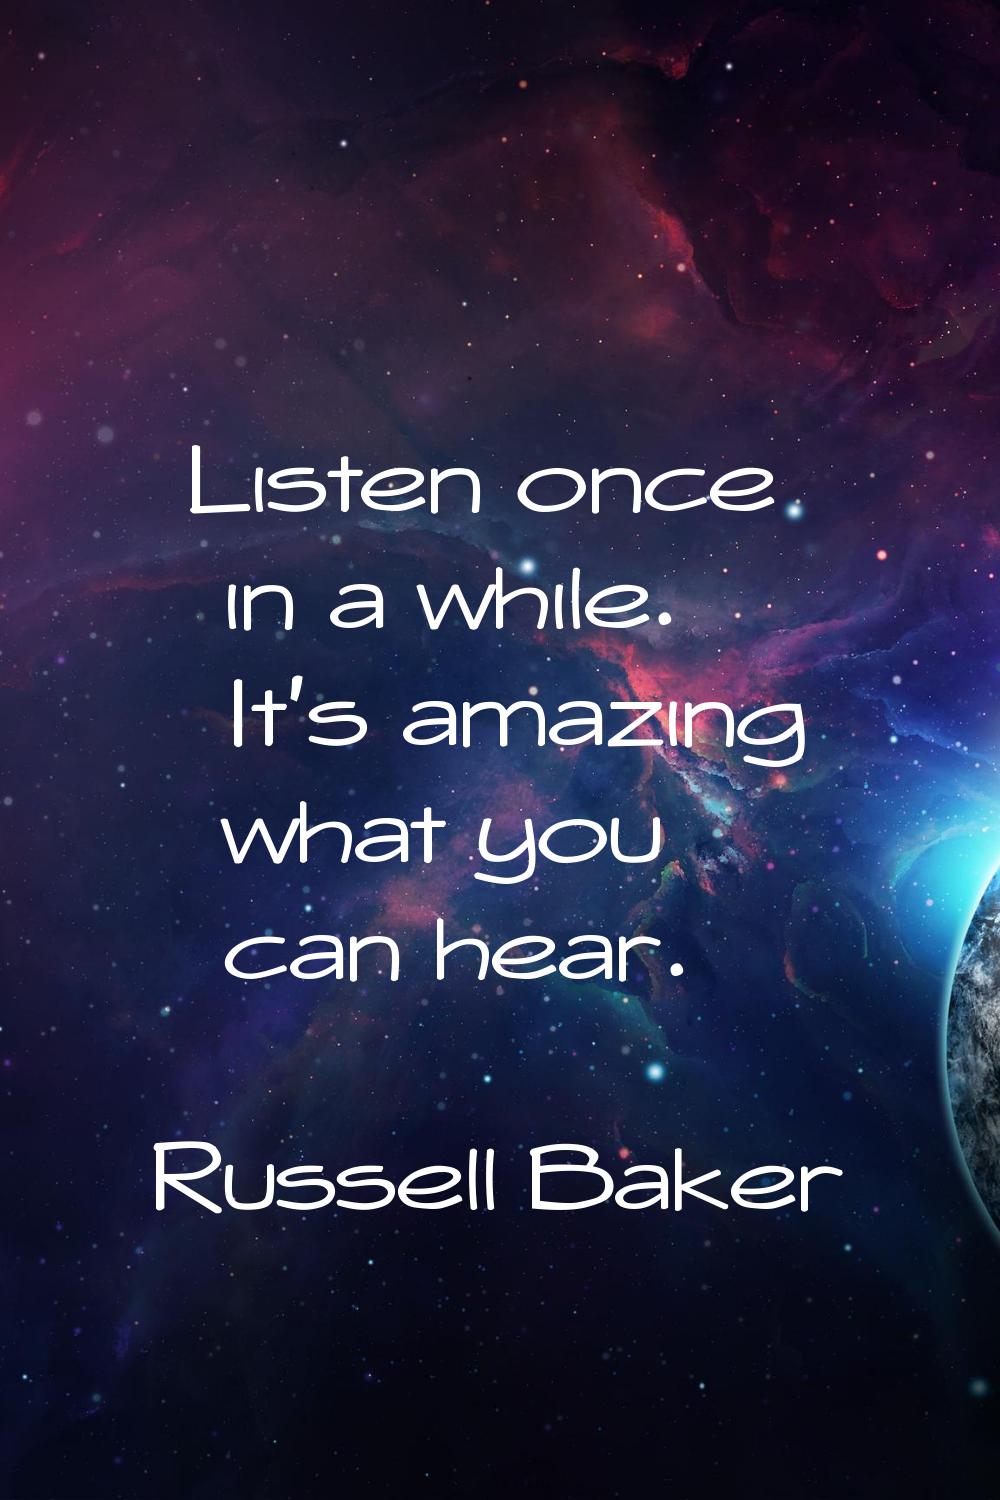 Listen once in a while. It's amazing what you can hear.